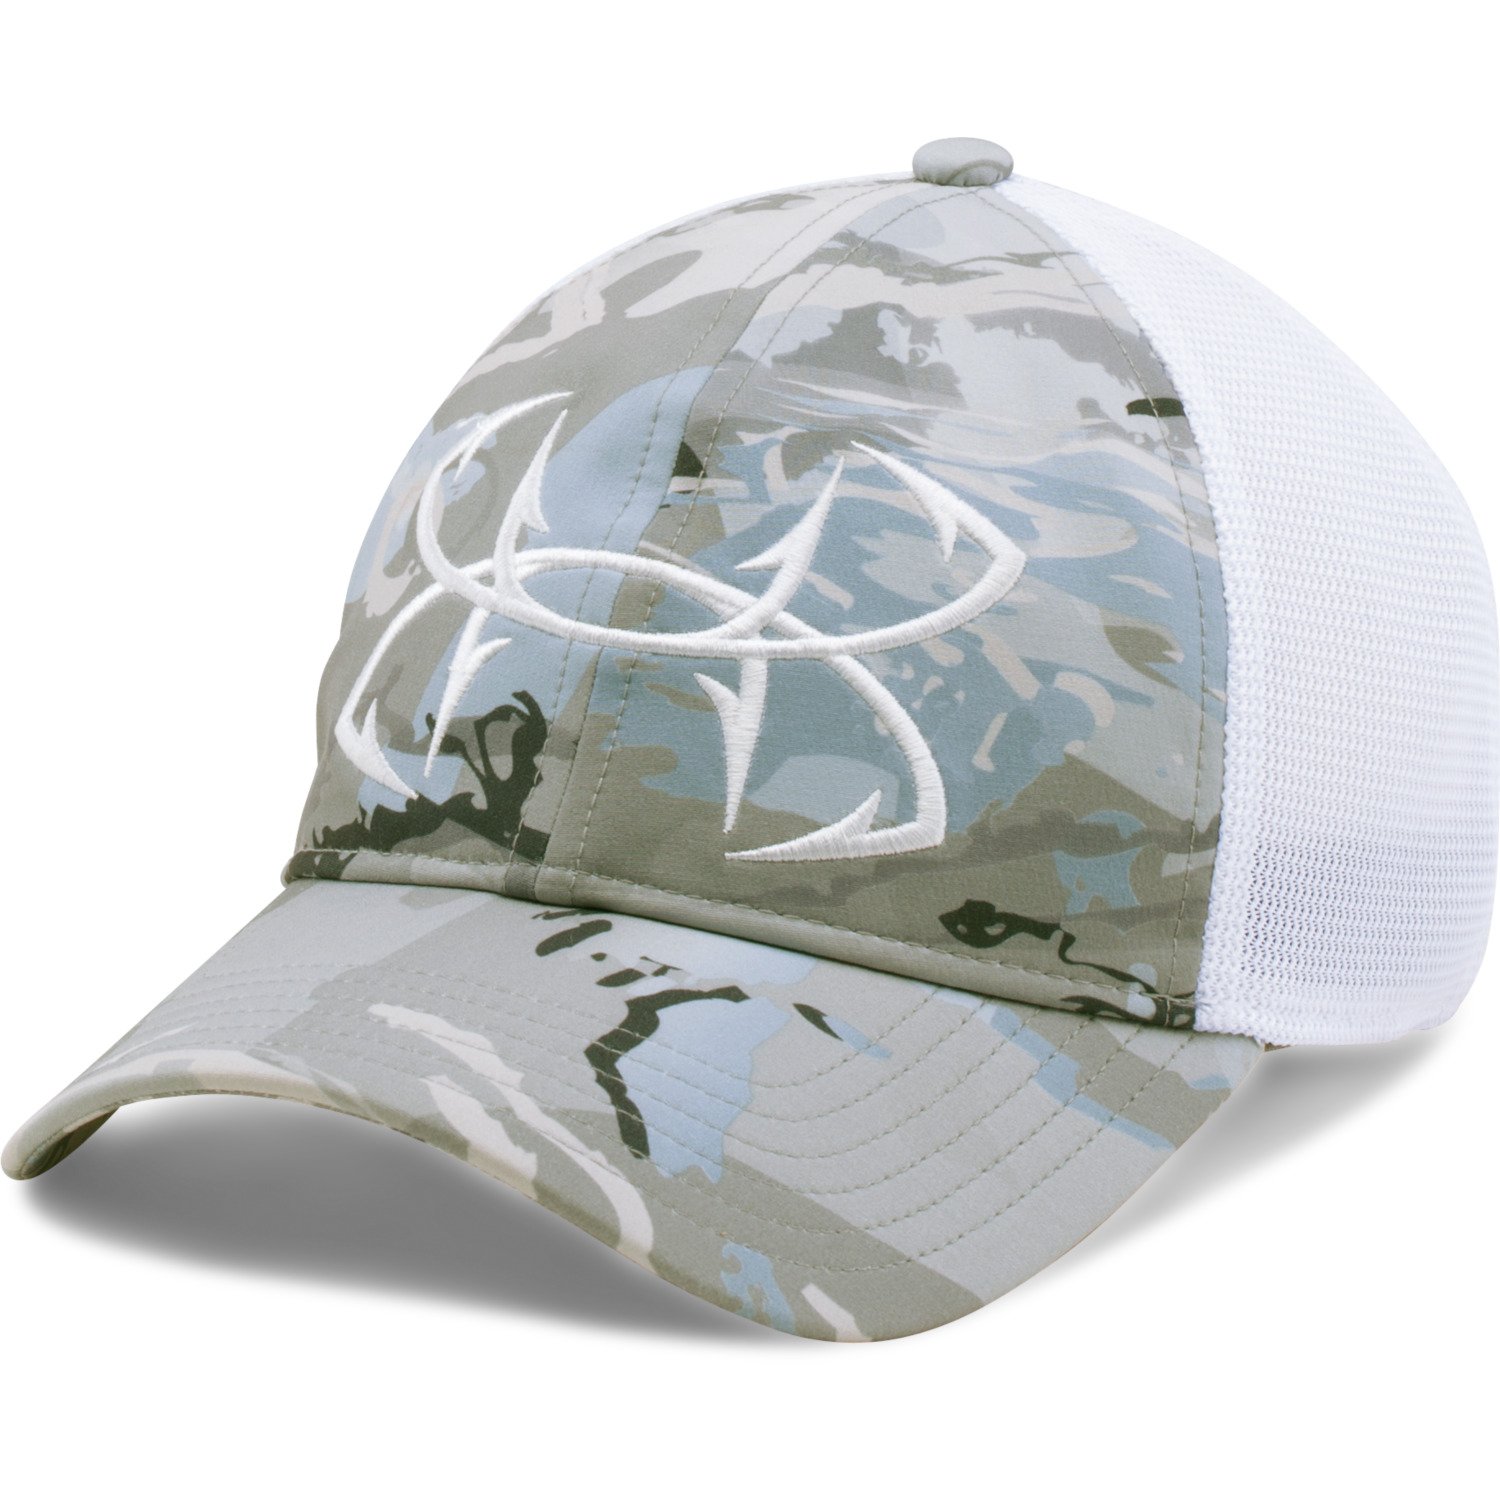 Cheap baby under armour hat Buy Online 